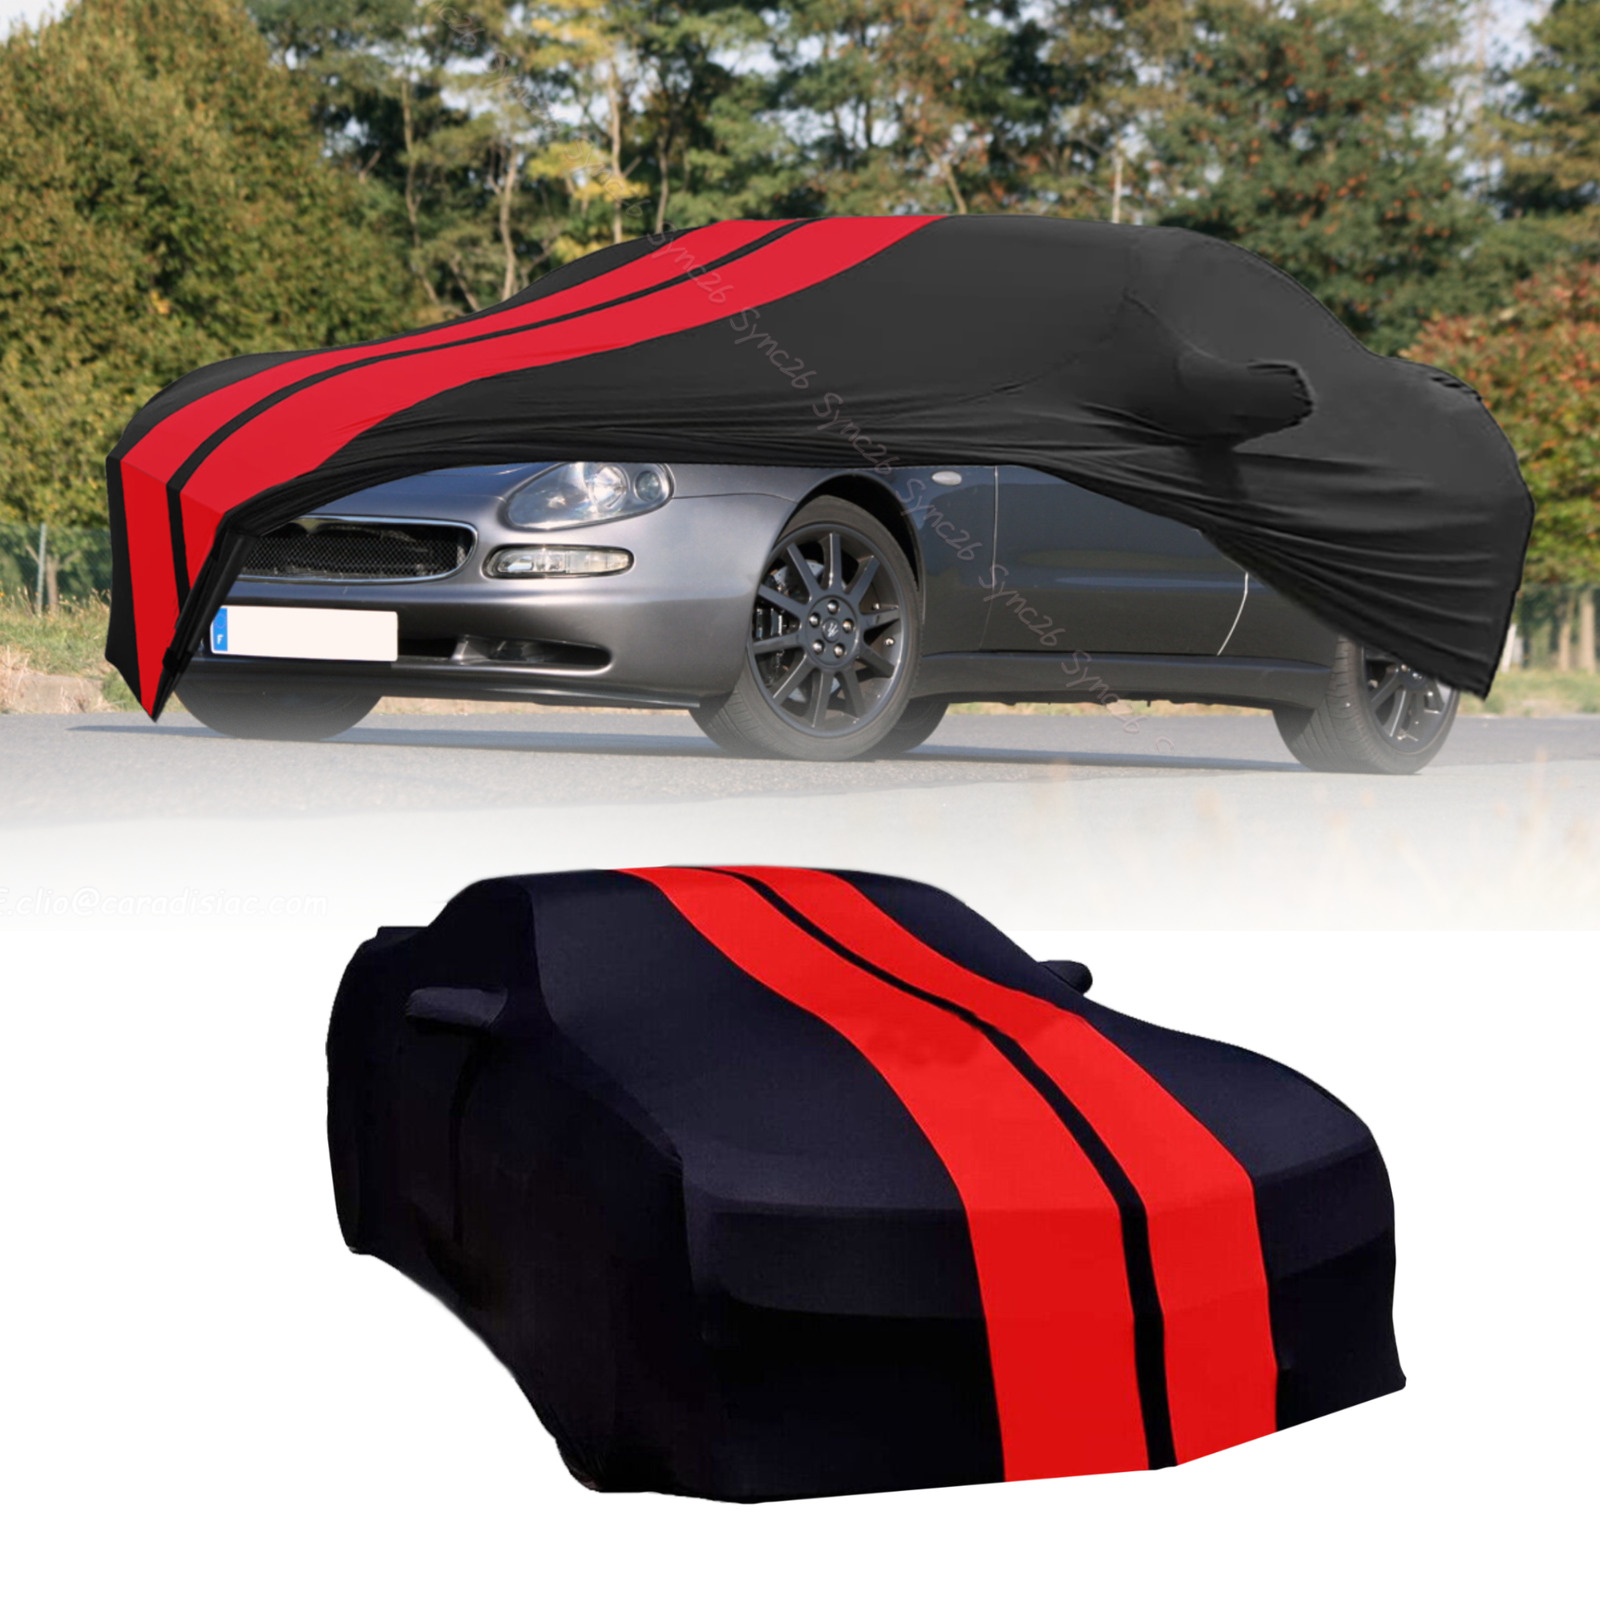 Red/Black Indoor Car Cover Stain Stretch Dustproof For Maserati 3200GT 430